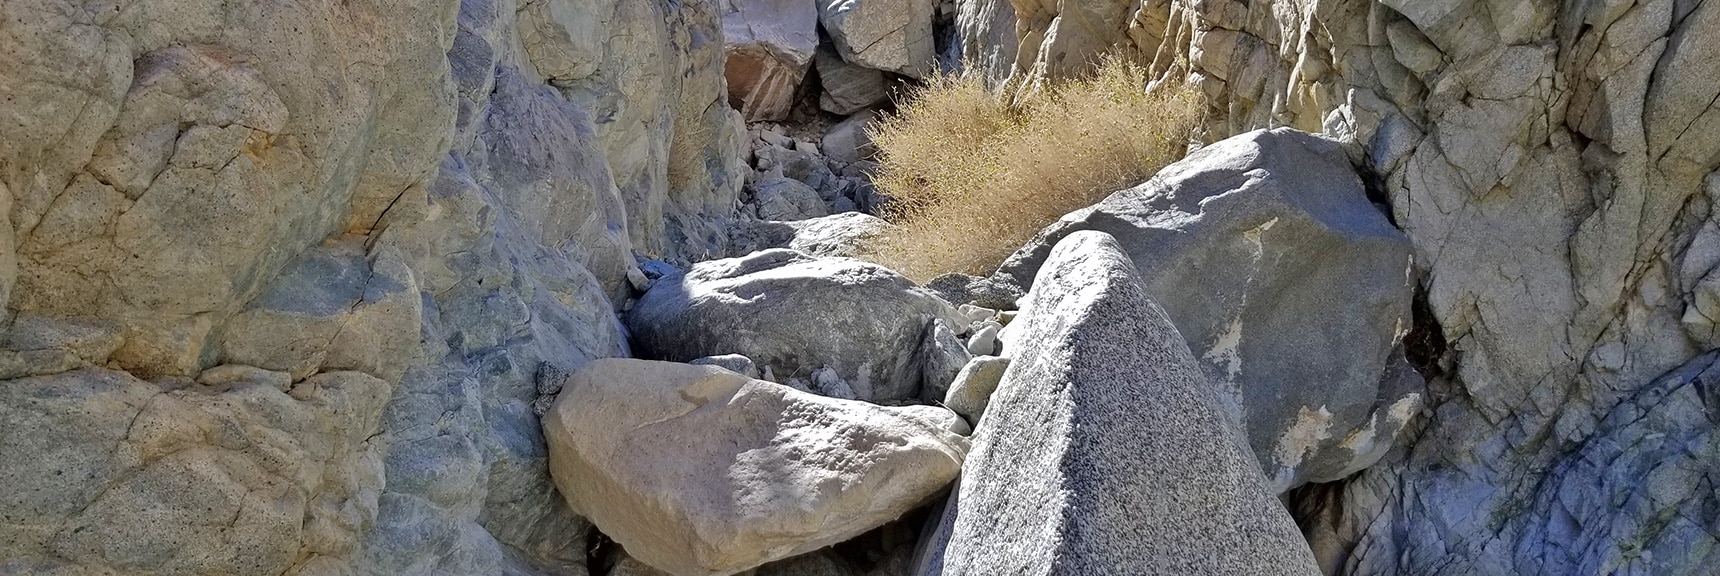 There are a Few Barriers Along the Way. Circumvent Via Ridges to the Left. | Horse Thief Canyon Loop | Mt. Wilson | Black Mountains | Lake Mead National Recreation Area, Arizona